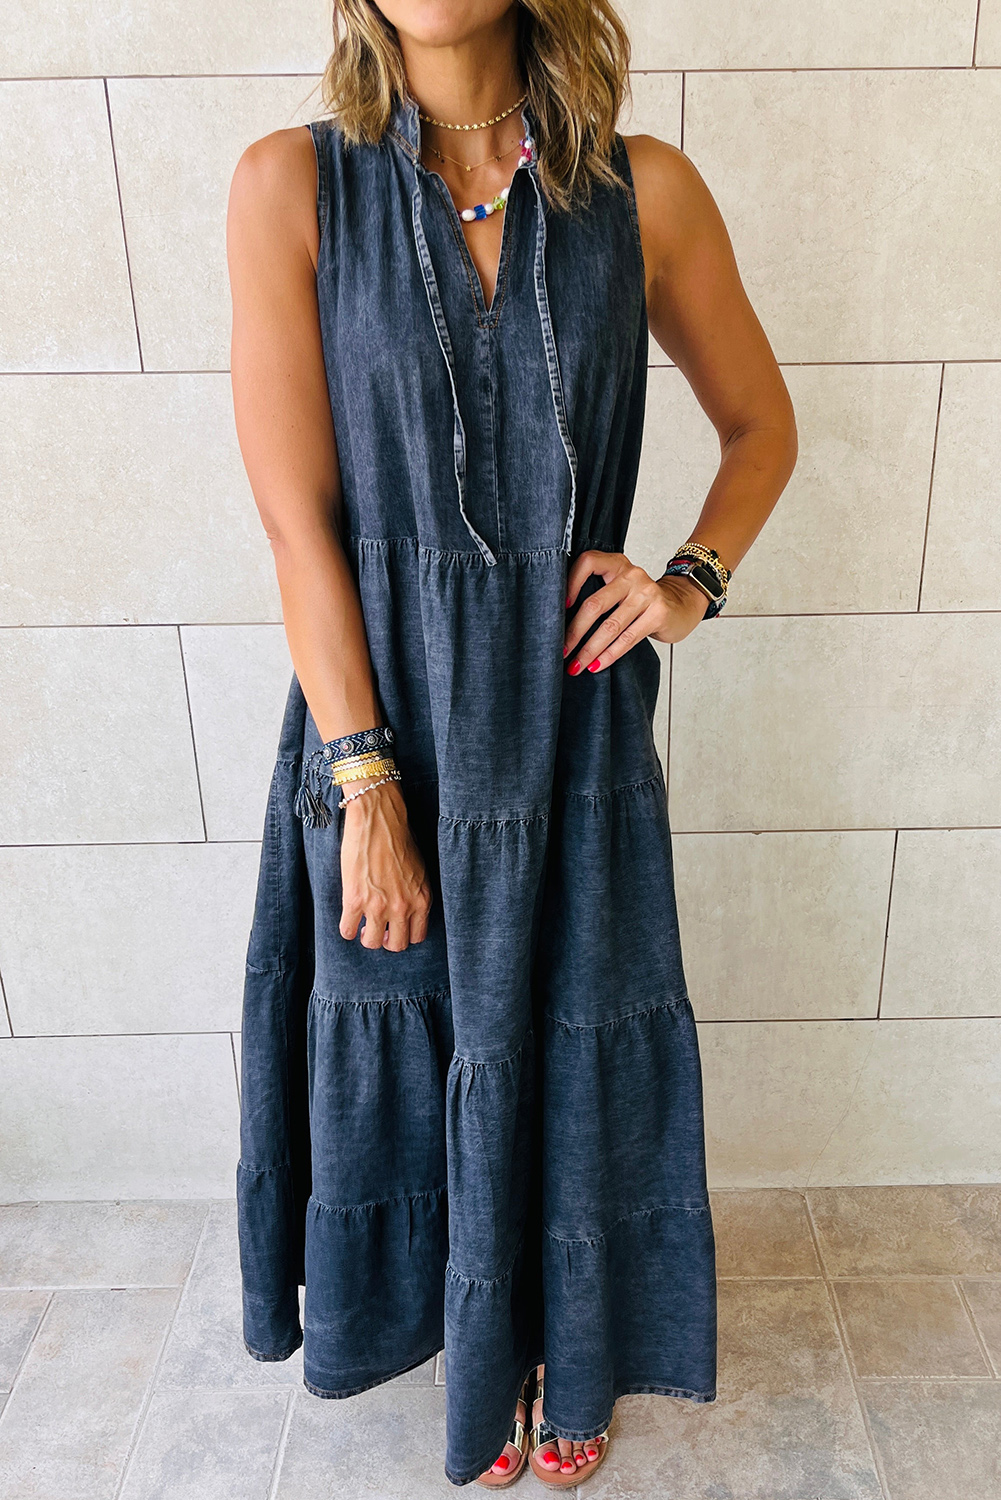 Shewin Wholesale WESTERN Real Teal Sleeveless Tiered Chambray Maxi Dress